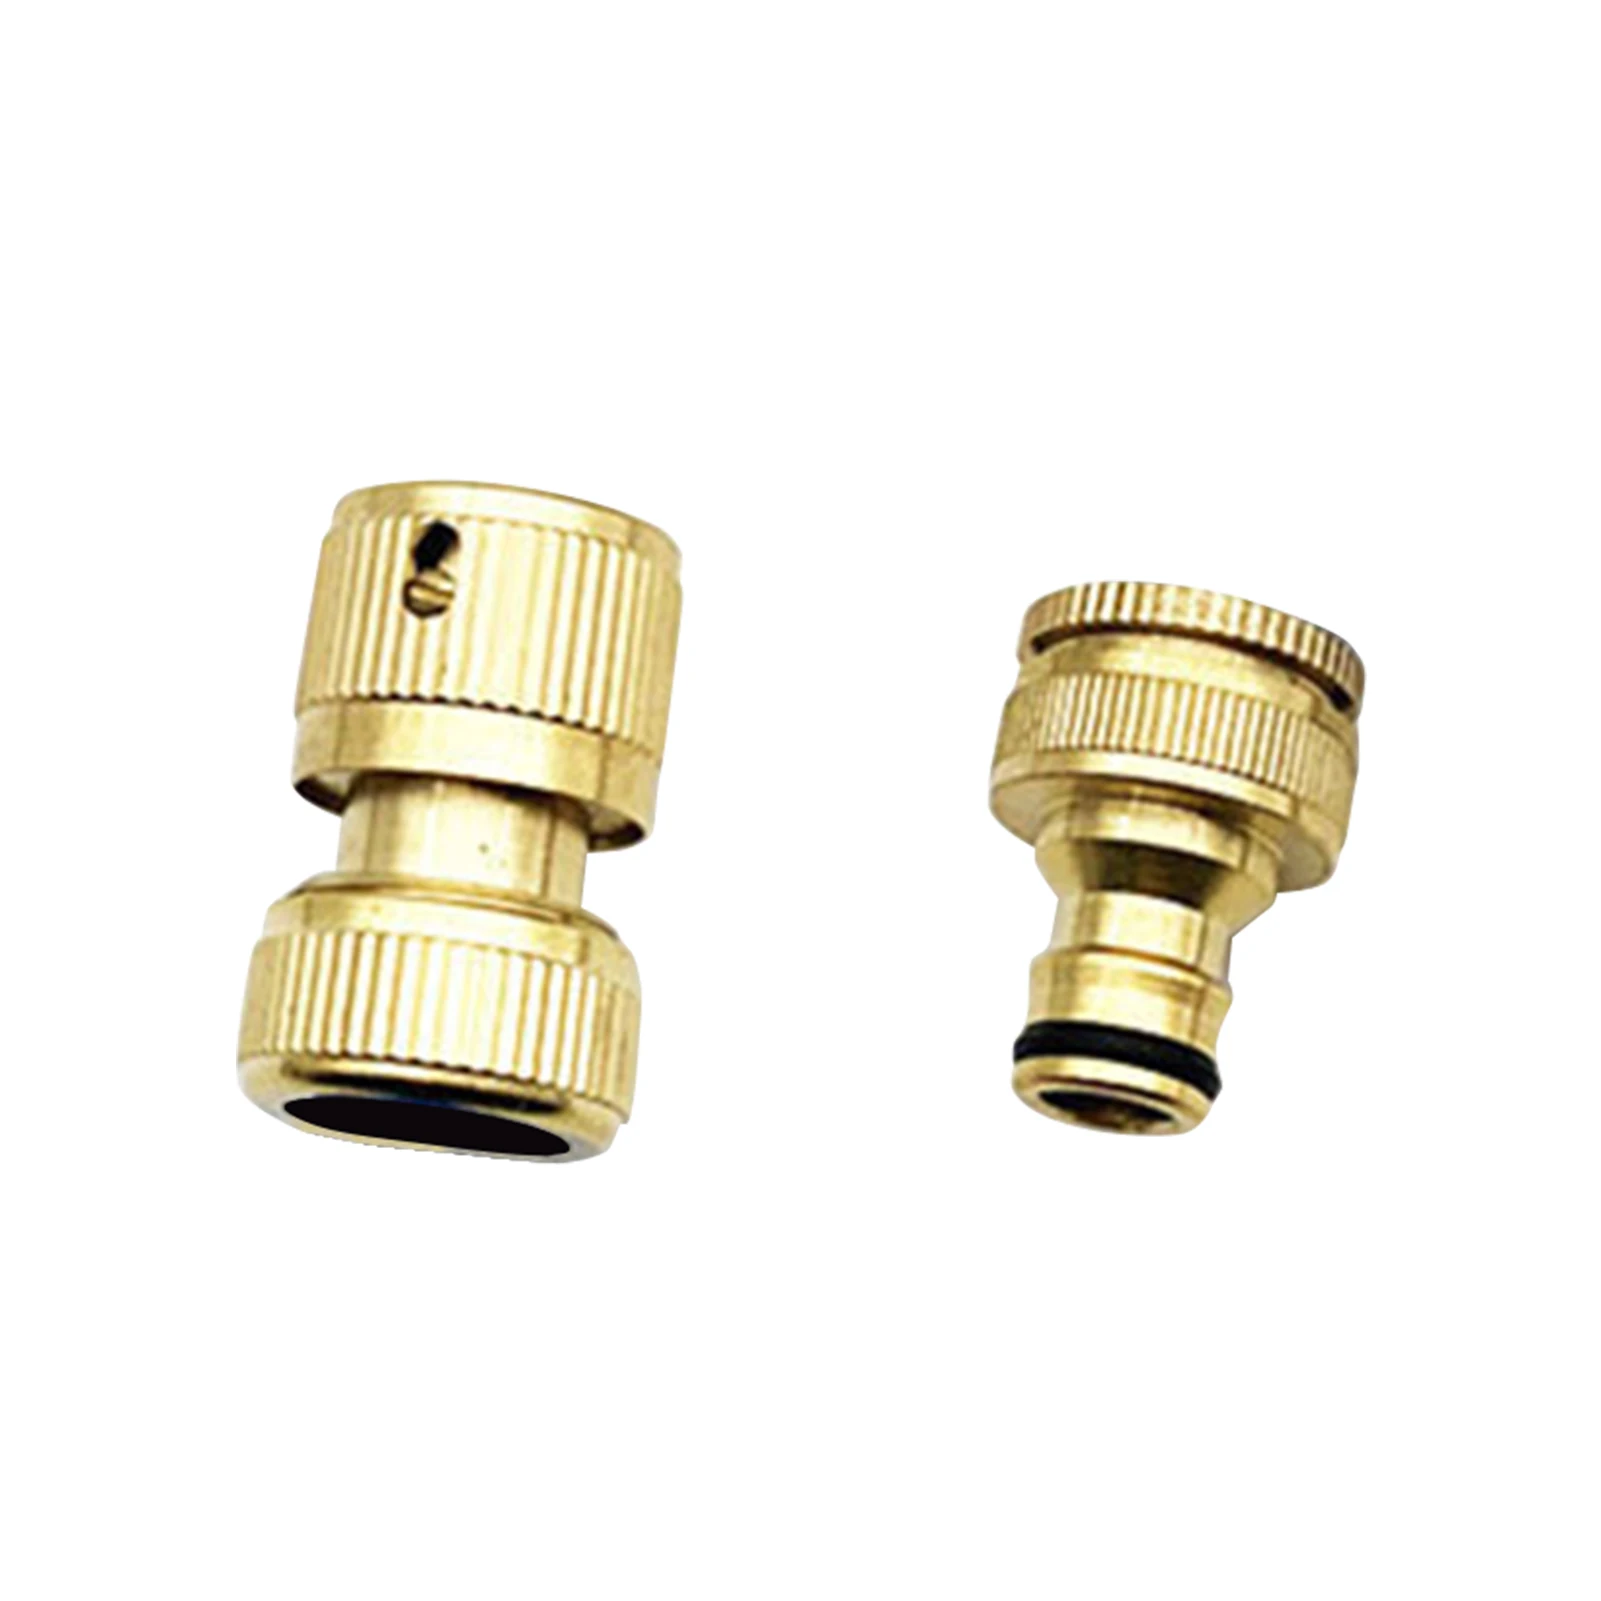 

2pcs Brass Tap Connector Set Outdoor Faucet Durable Watering Fitting Threaded Garden Hose 2 In 1 Adapter Leakproof Accessories